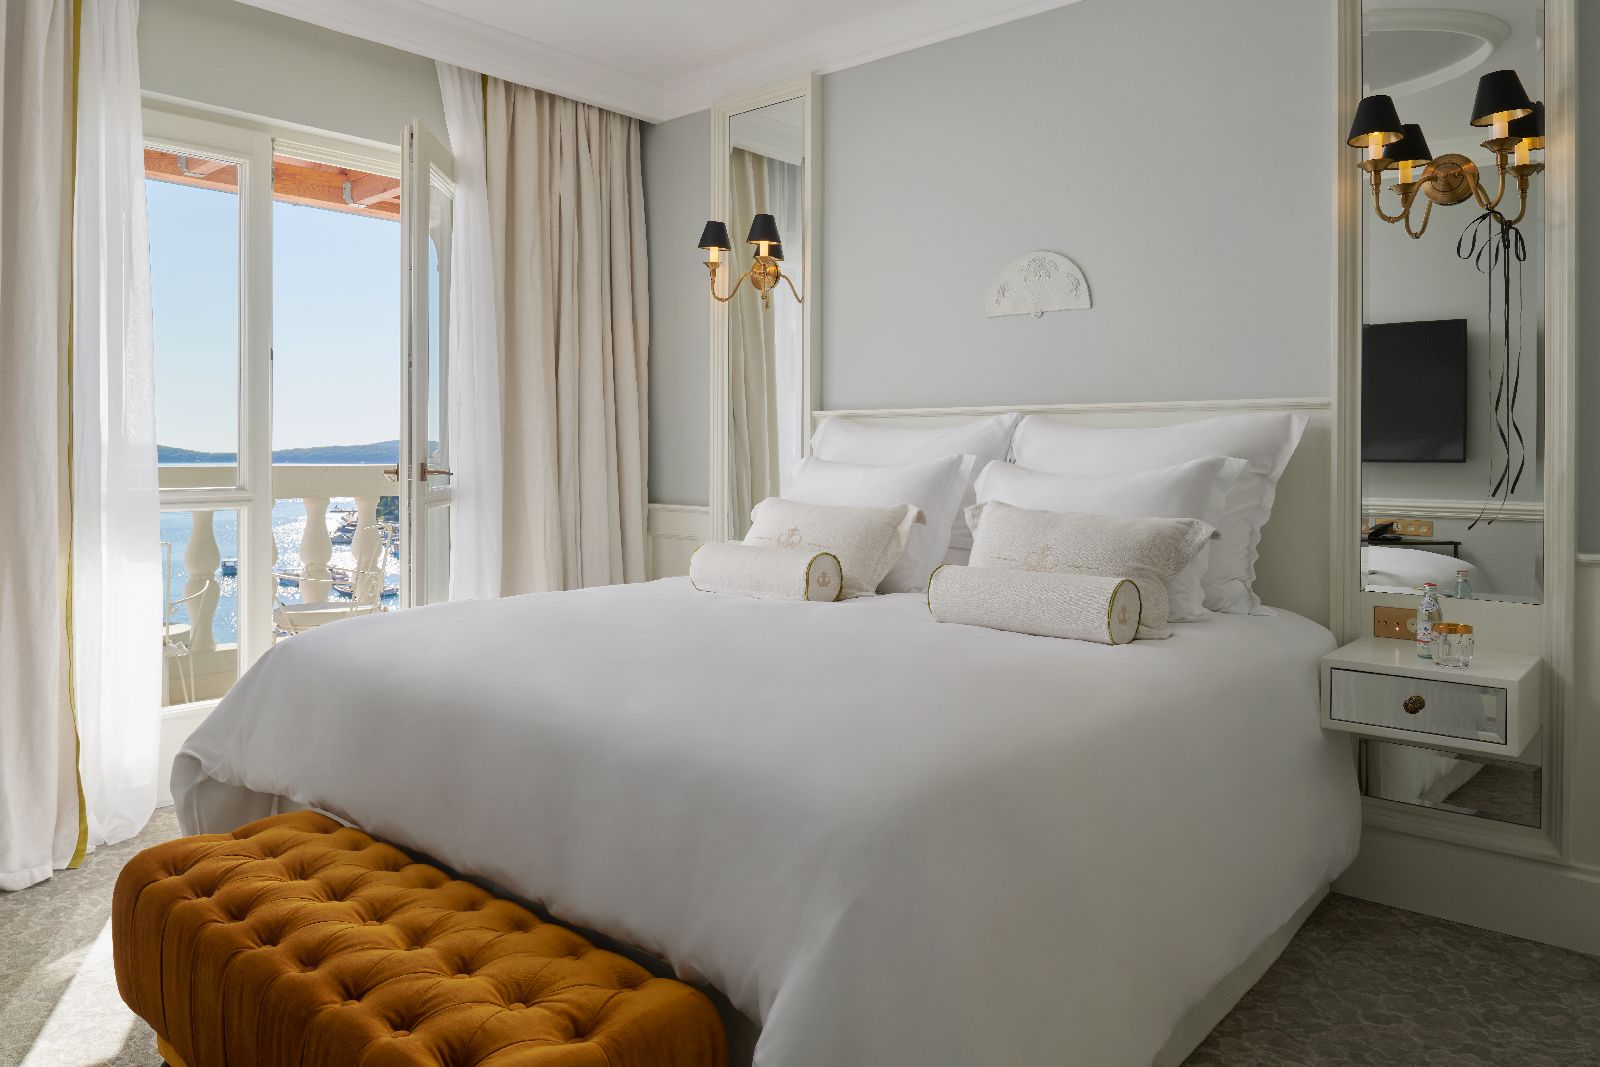 Penthouse suite with sea view at the Palace Elisabeth hotel in Hvar Croatia